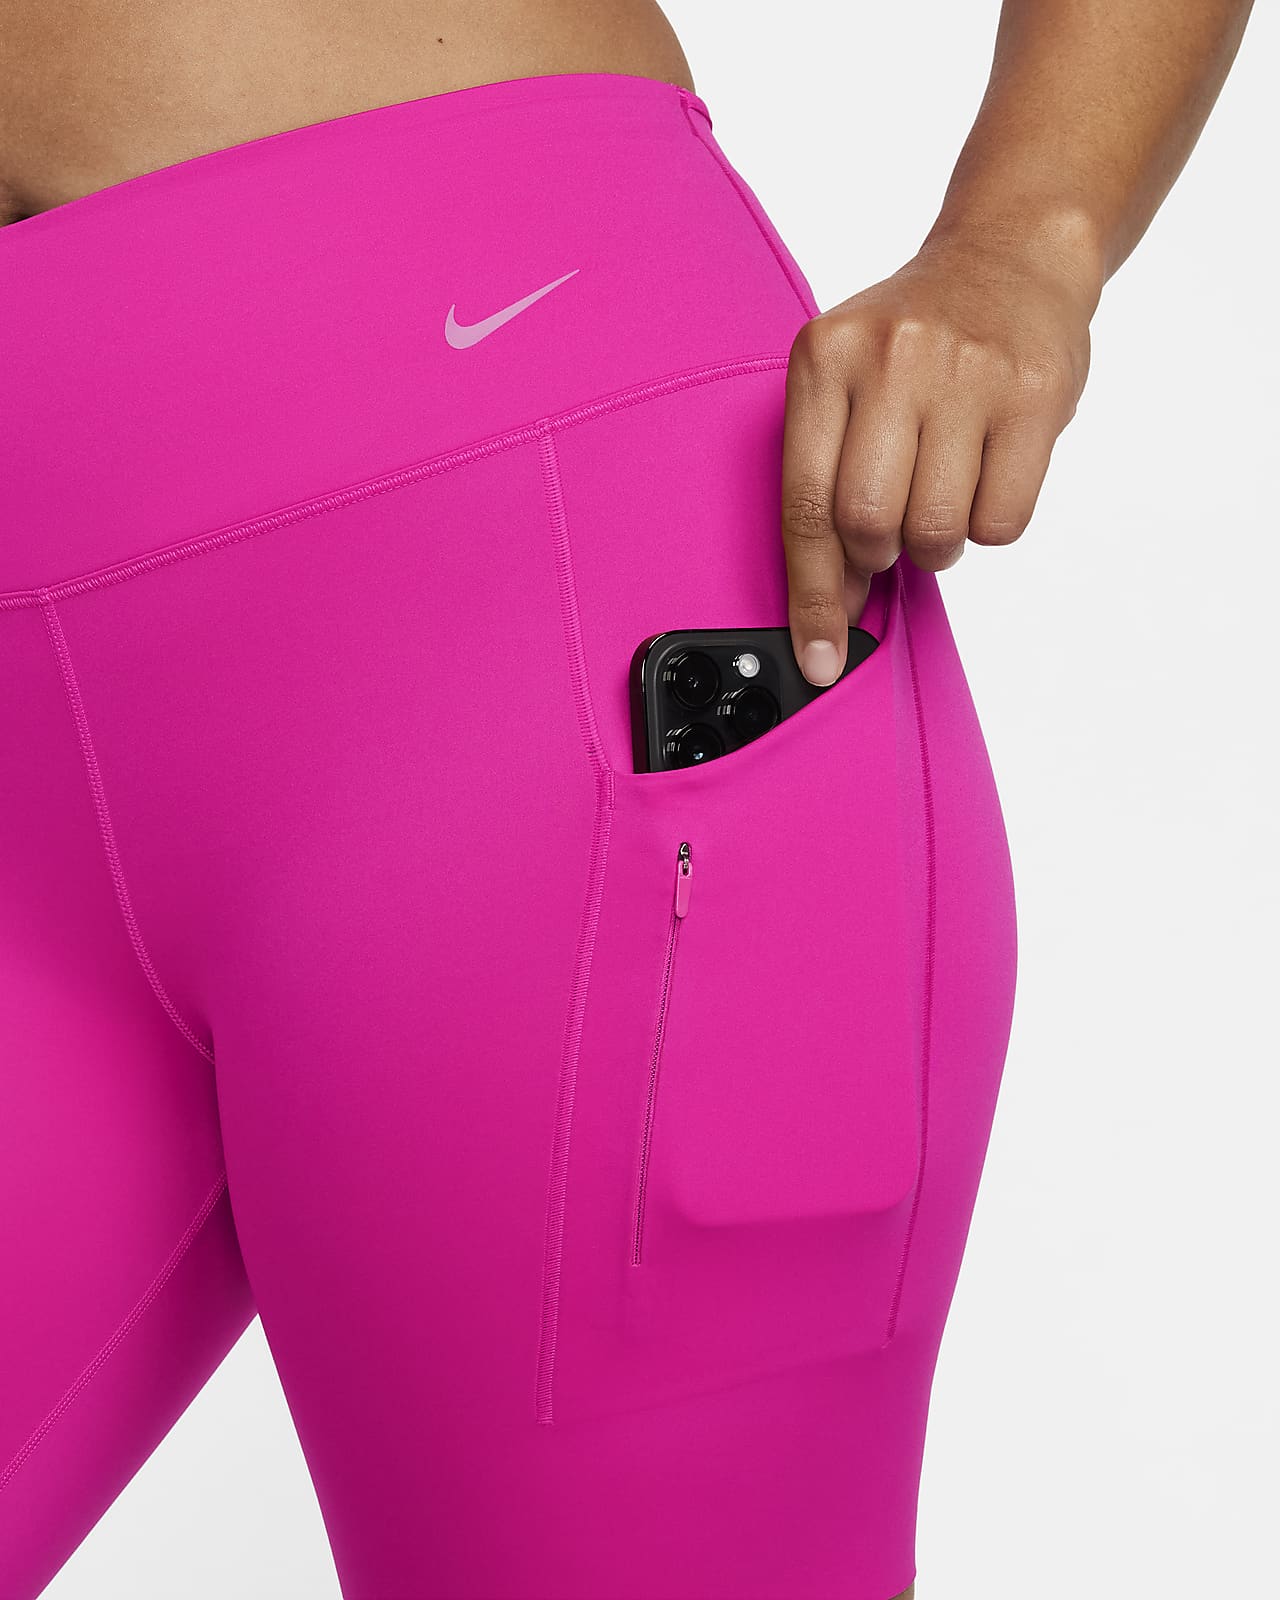 🎁 Giveaway - Slow Motion - Nike Pro Shorts and Sports Bra - Try On 